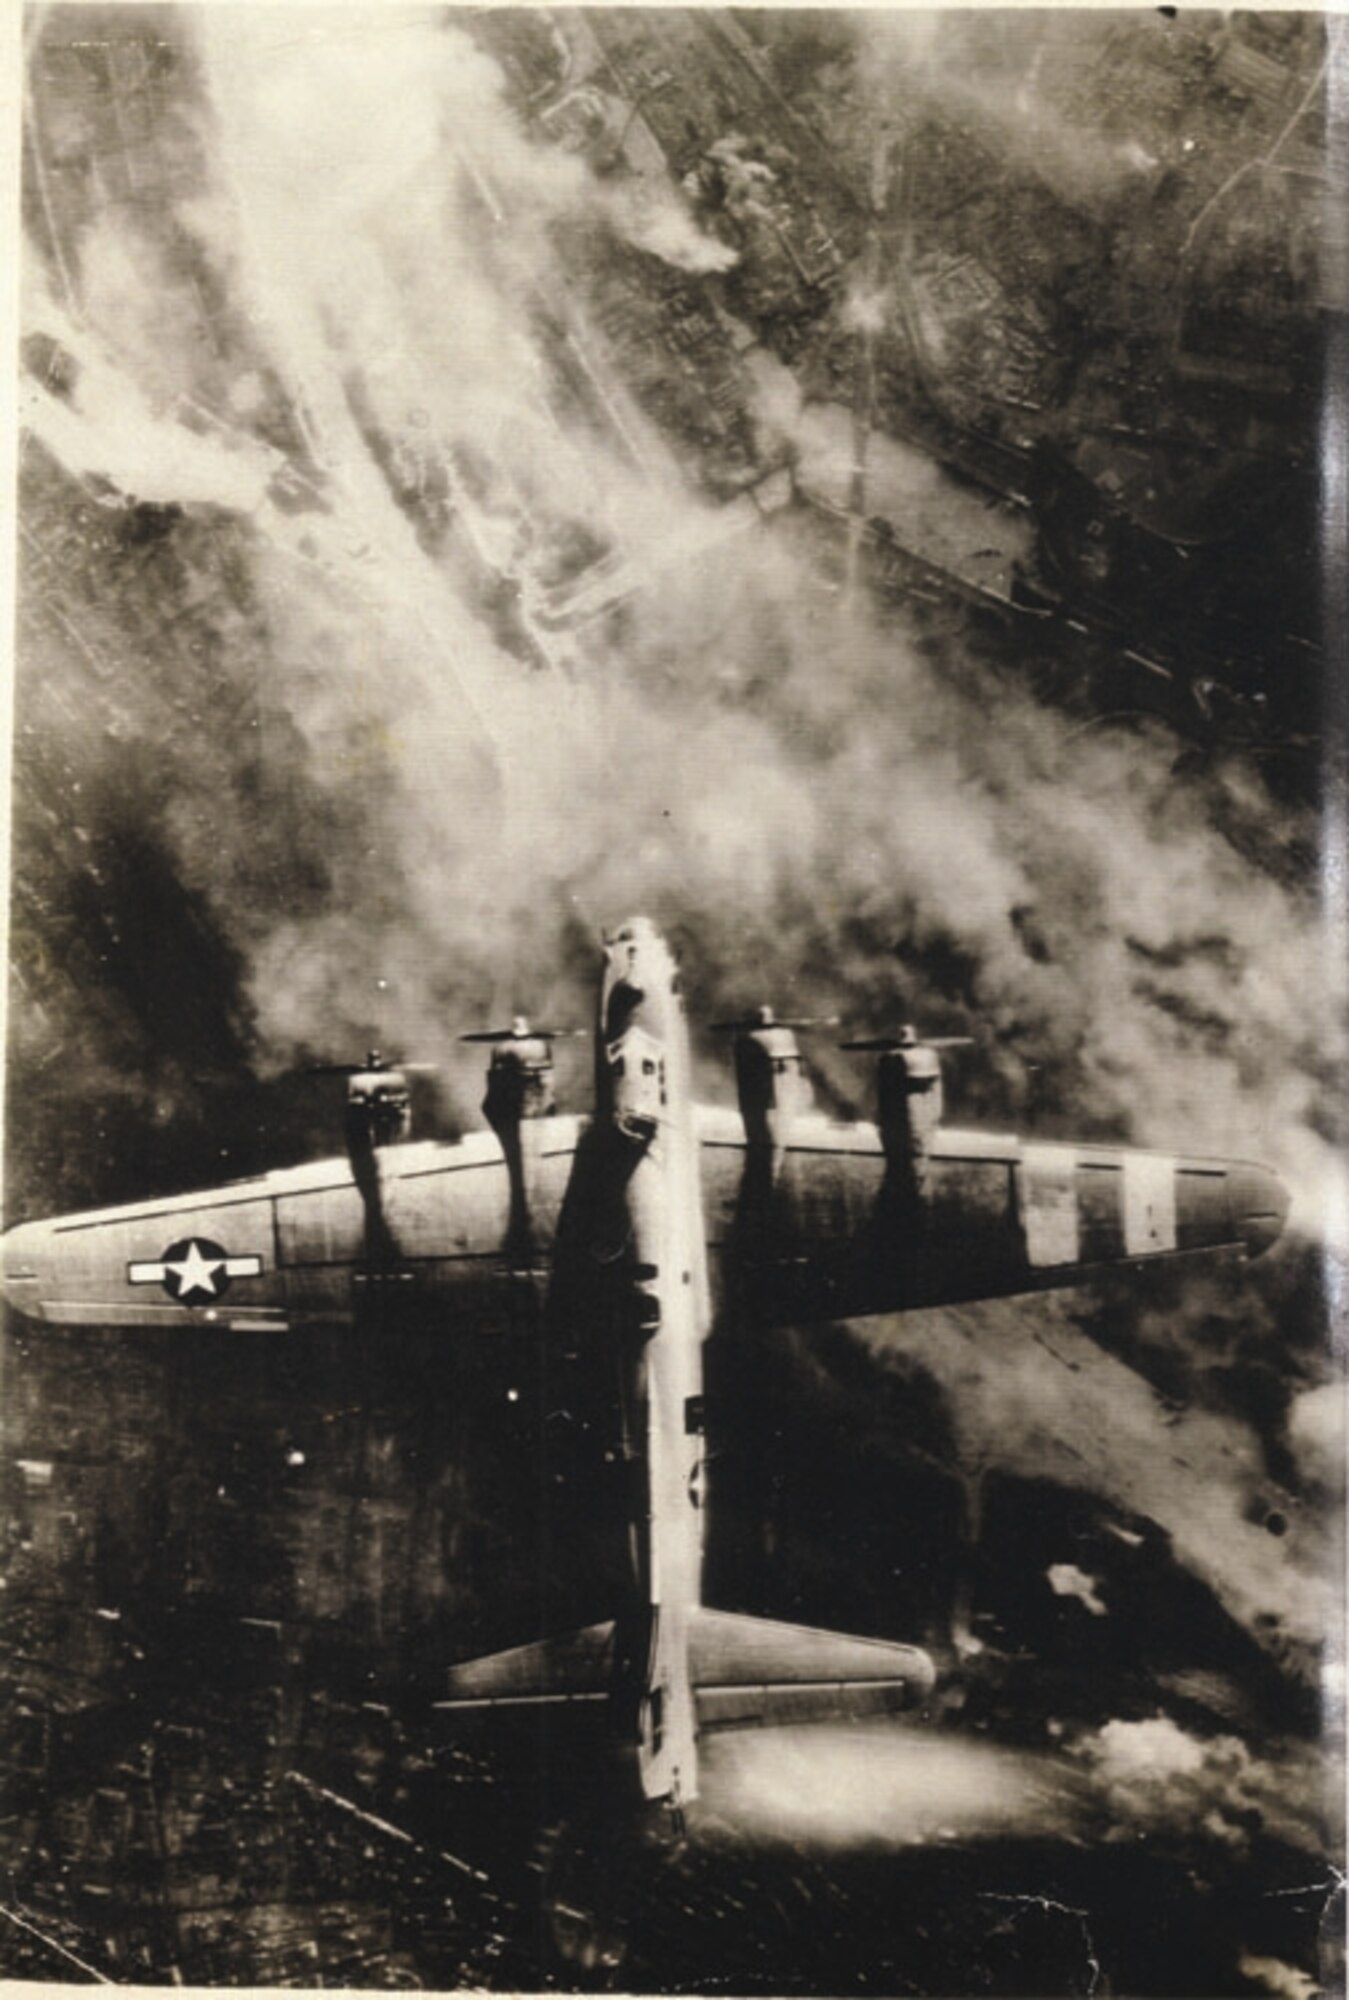 A 452nd Bomb Group Flying Fortress in the air during World War II. (U.S. Army Air Corps photo courtesy of Harvey Shaw)